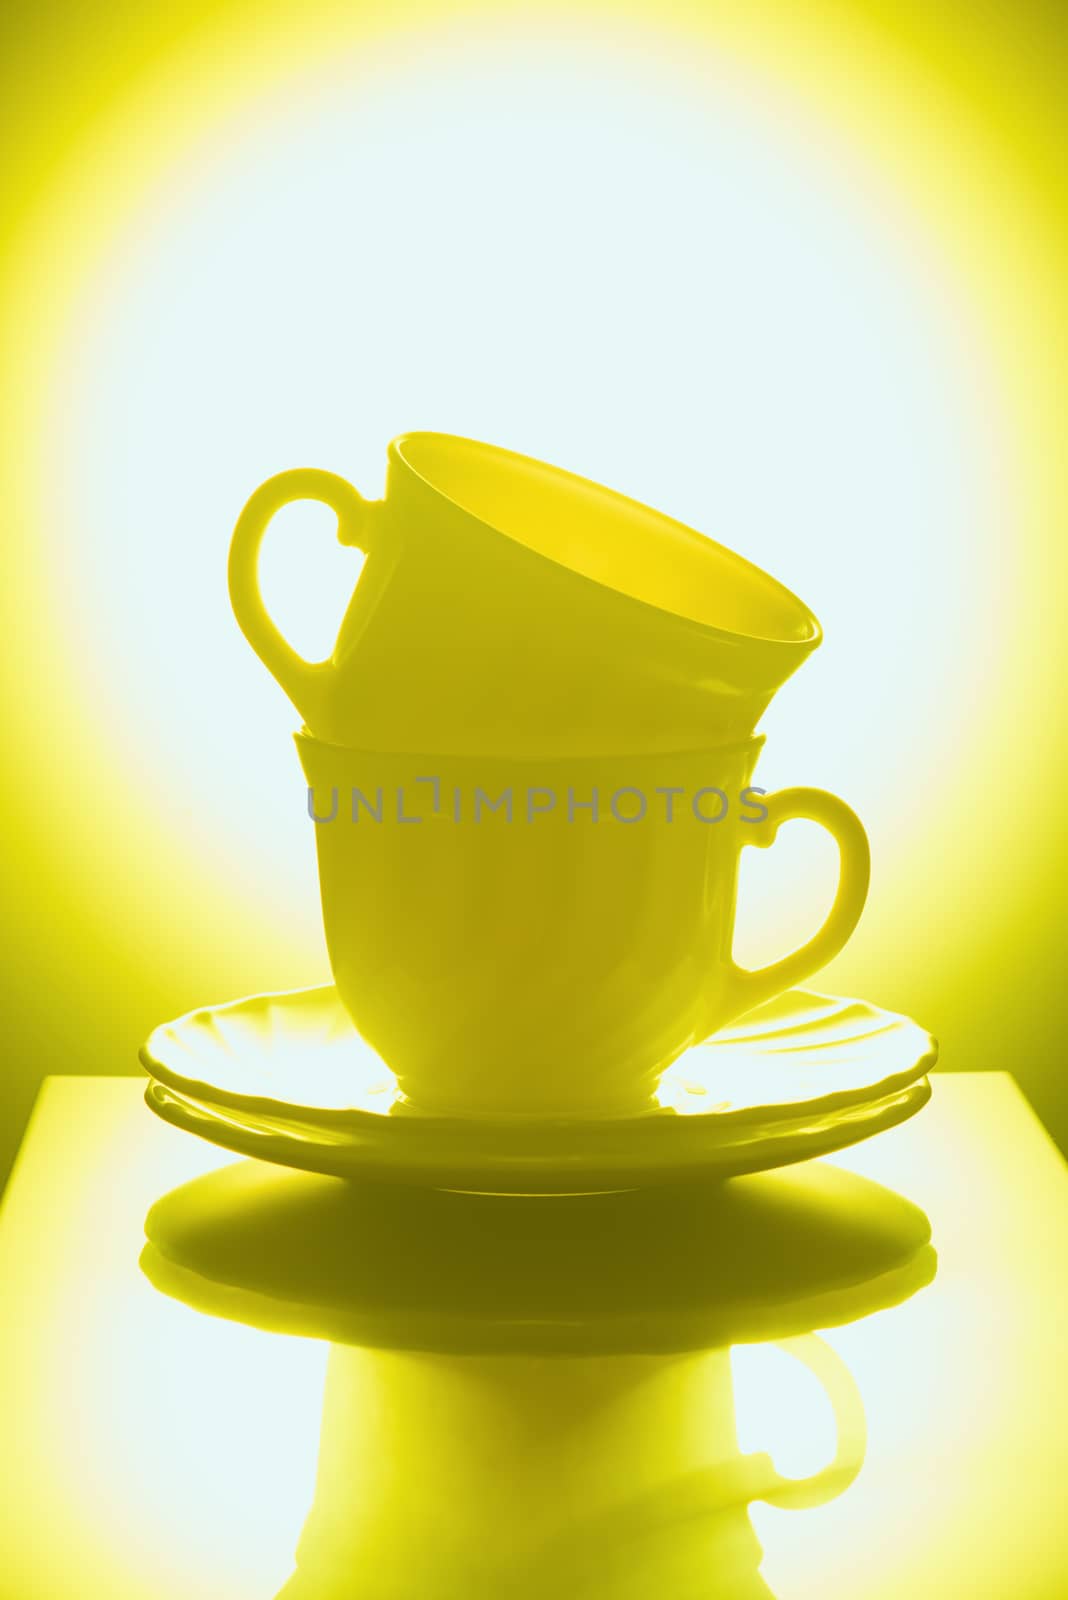 Cups for tea with saucers on a yellow background